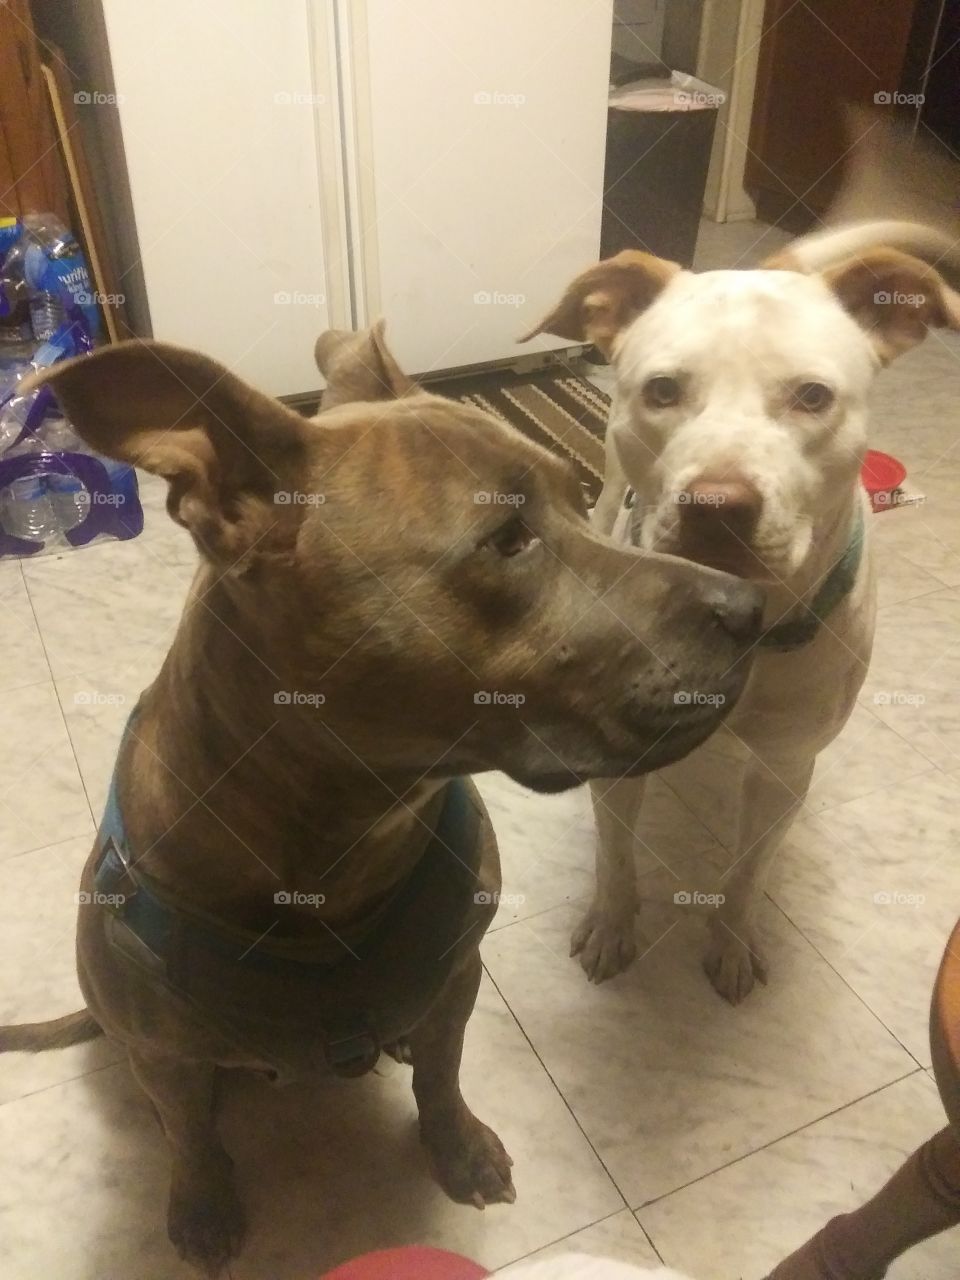 Cult and Coot, my pit rescue and a pup from my brother's dog. The true loves of my life. They saved me, idc how cheesy that sounds